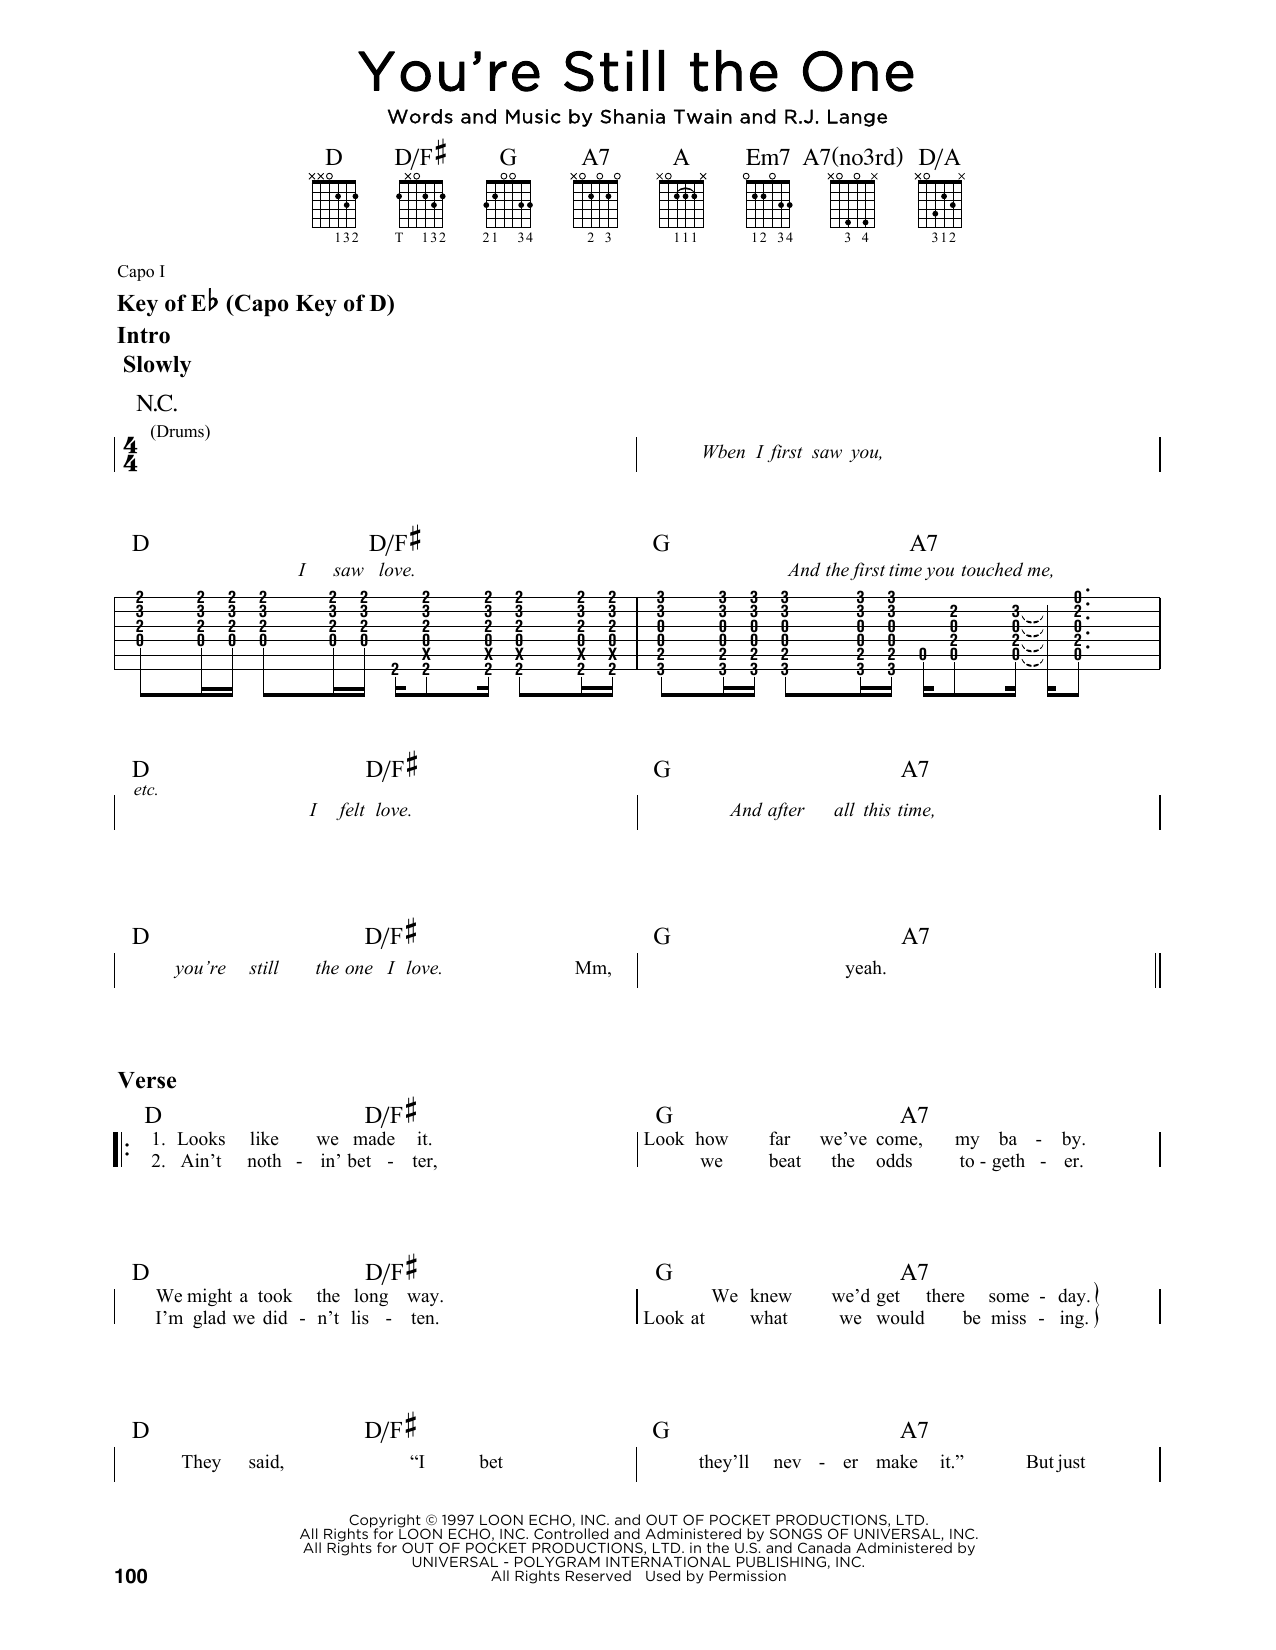 Download Shania Twain You're Still The One Sheet Music